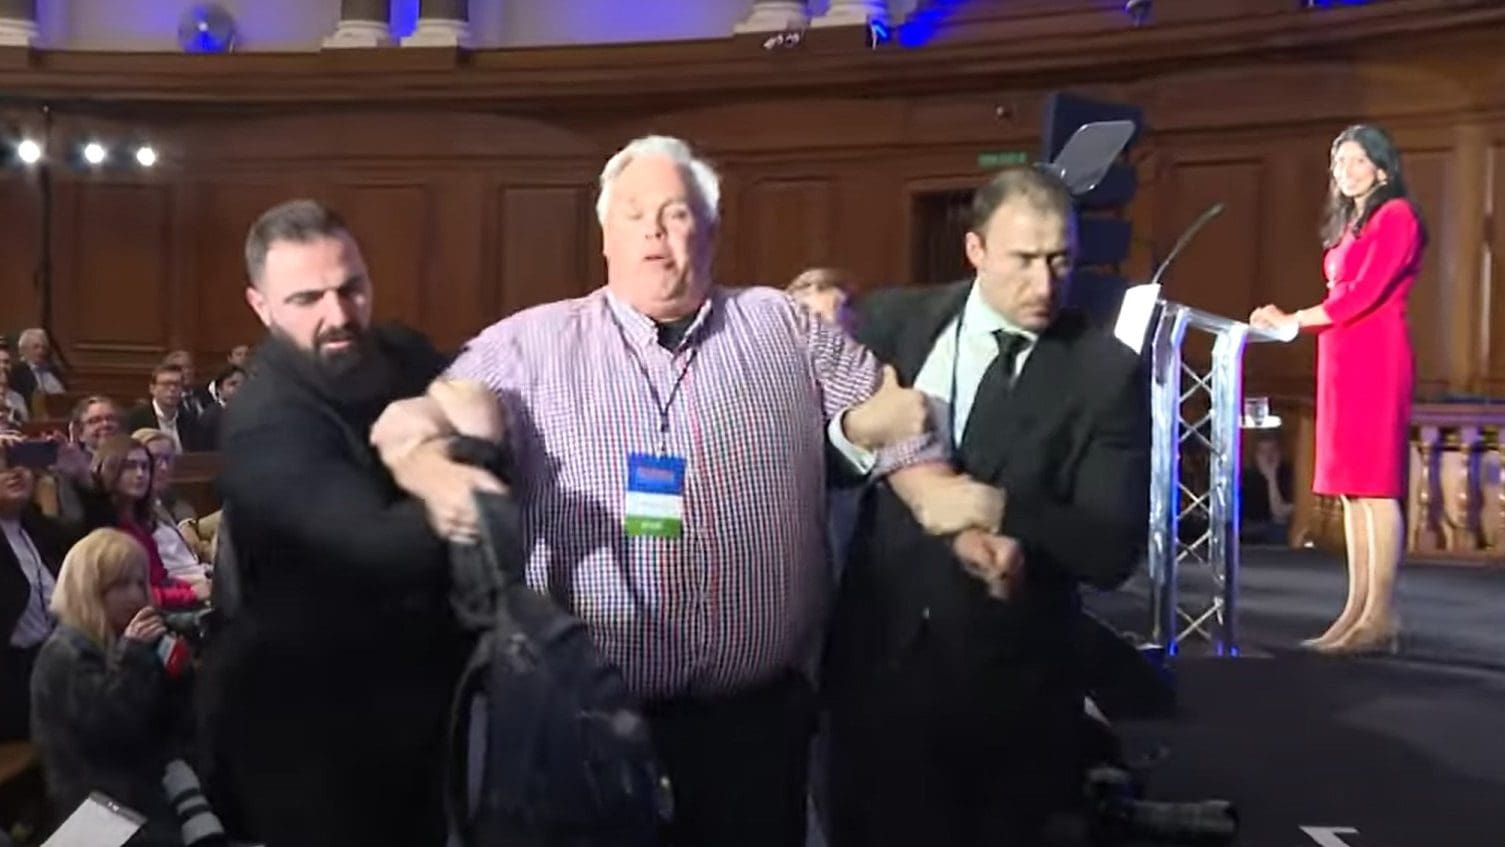 Conservative Conference in the UK Interrupted by Environmentalist Radicals